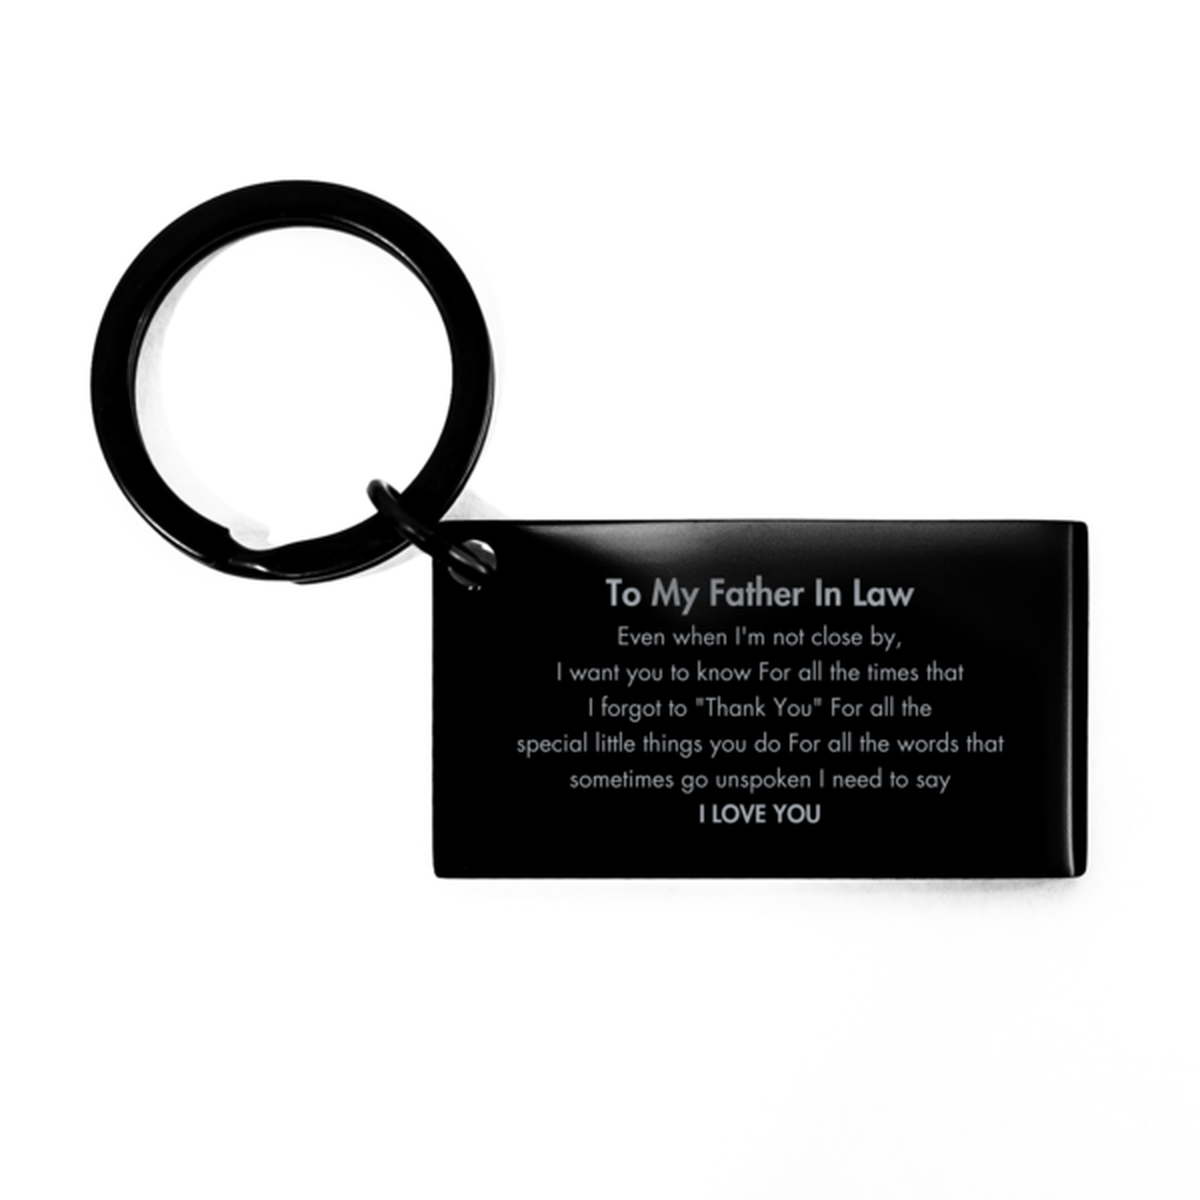 Thank You Gifts for Father In Law, Keepsake Keychain Gifts for Father In Law Birthday Mother's day Father's Day Father In Law For all the words That sometimes go unspoken I need to say I LOVE YOU